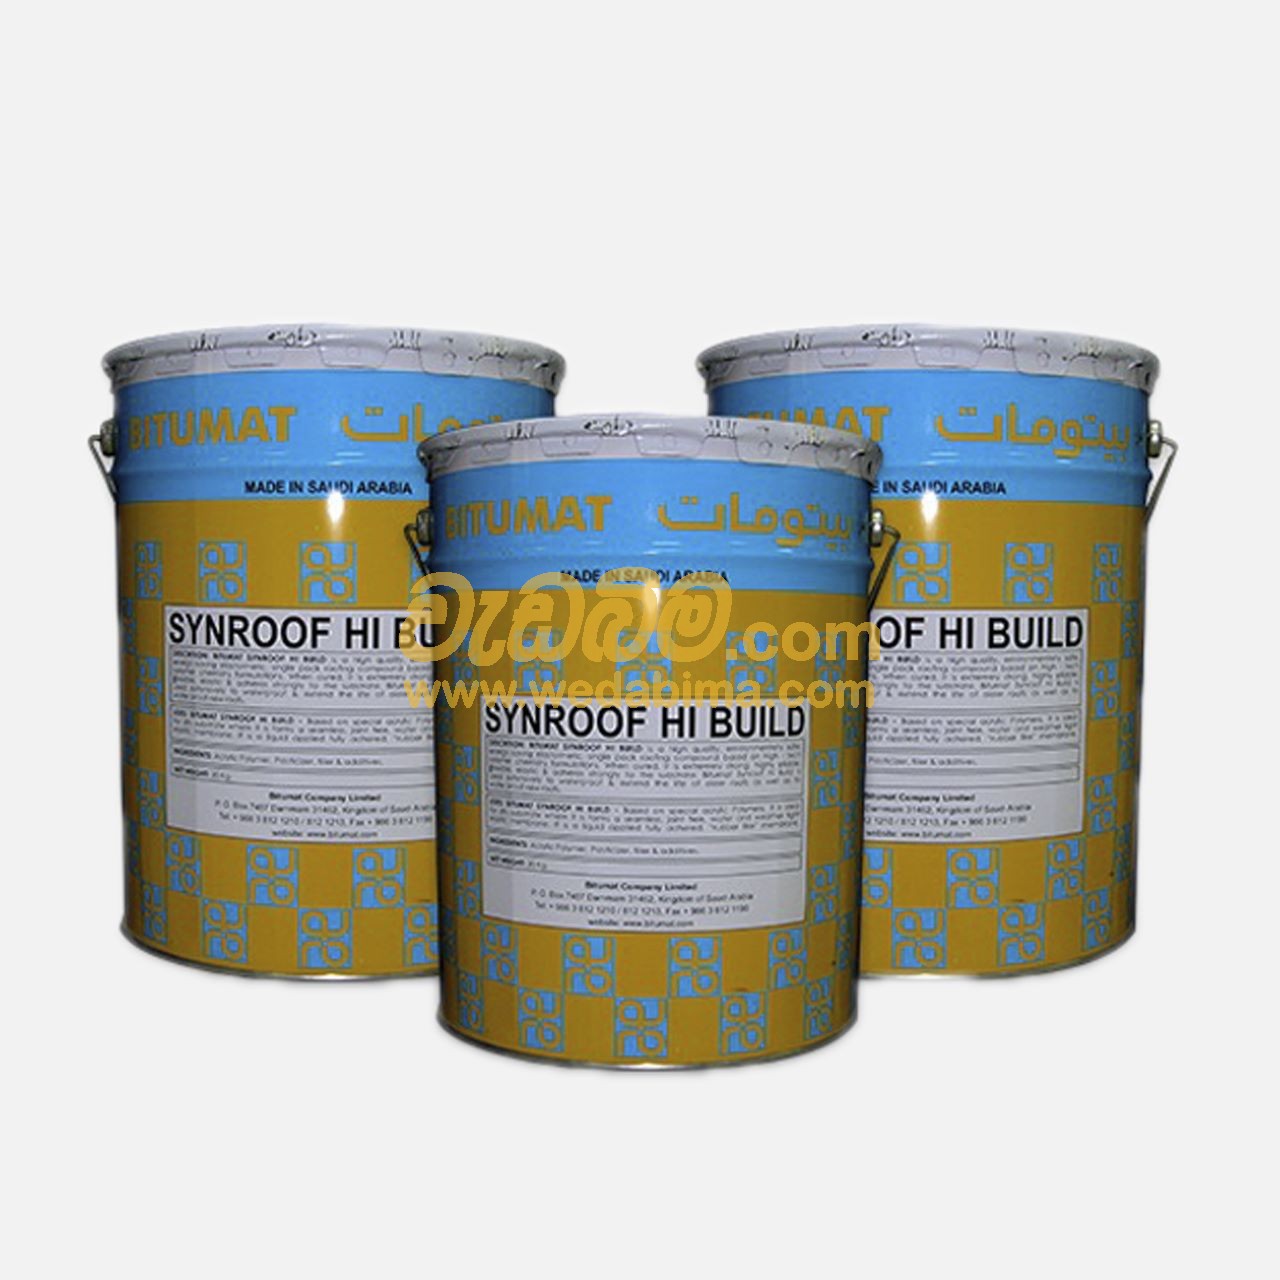 SYNROOF HB for exterior walls, concrete slabs waterproofing